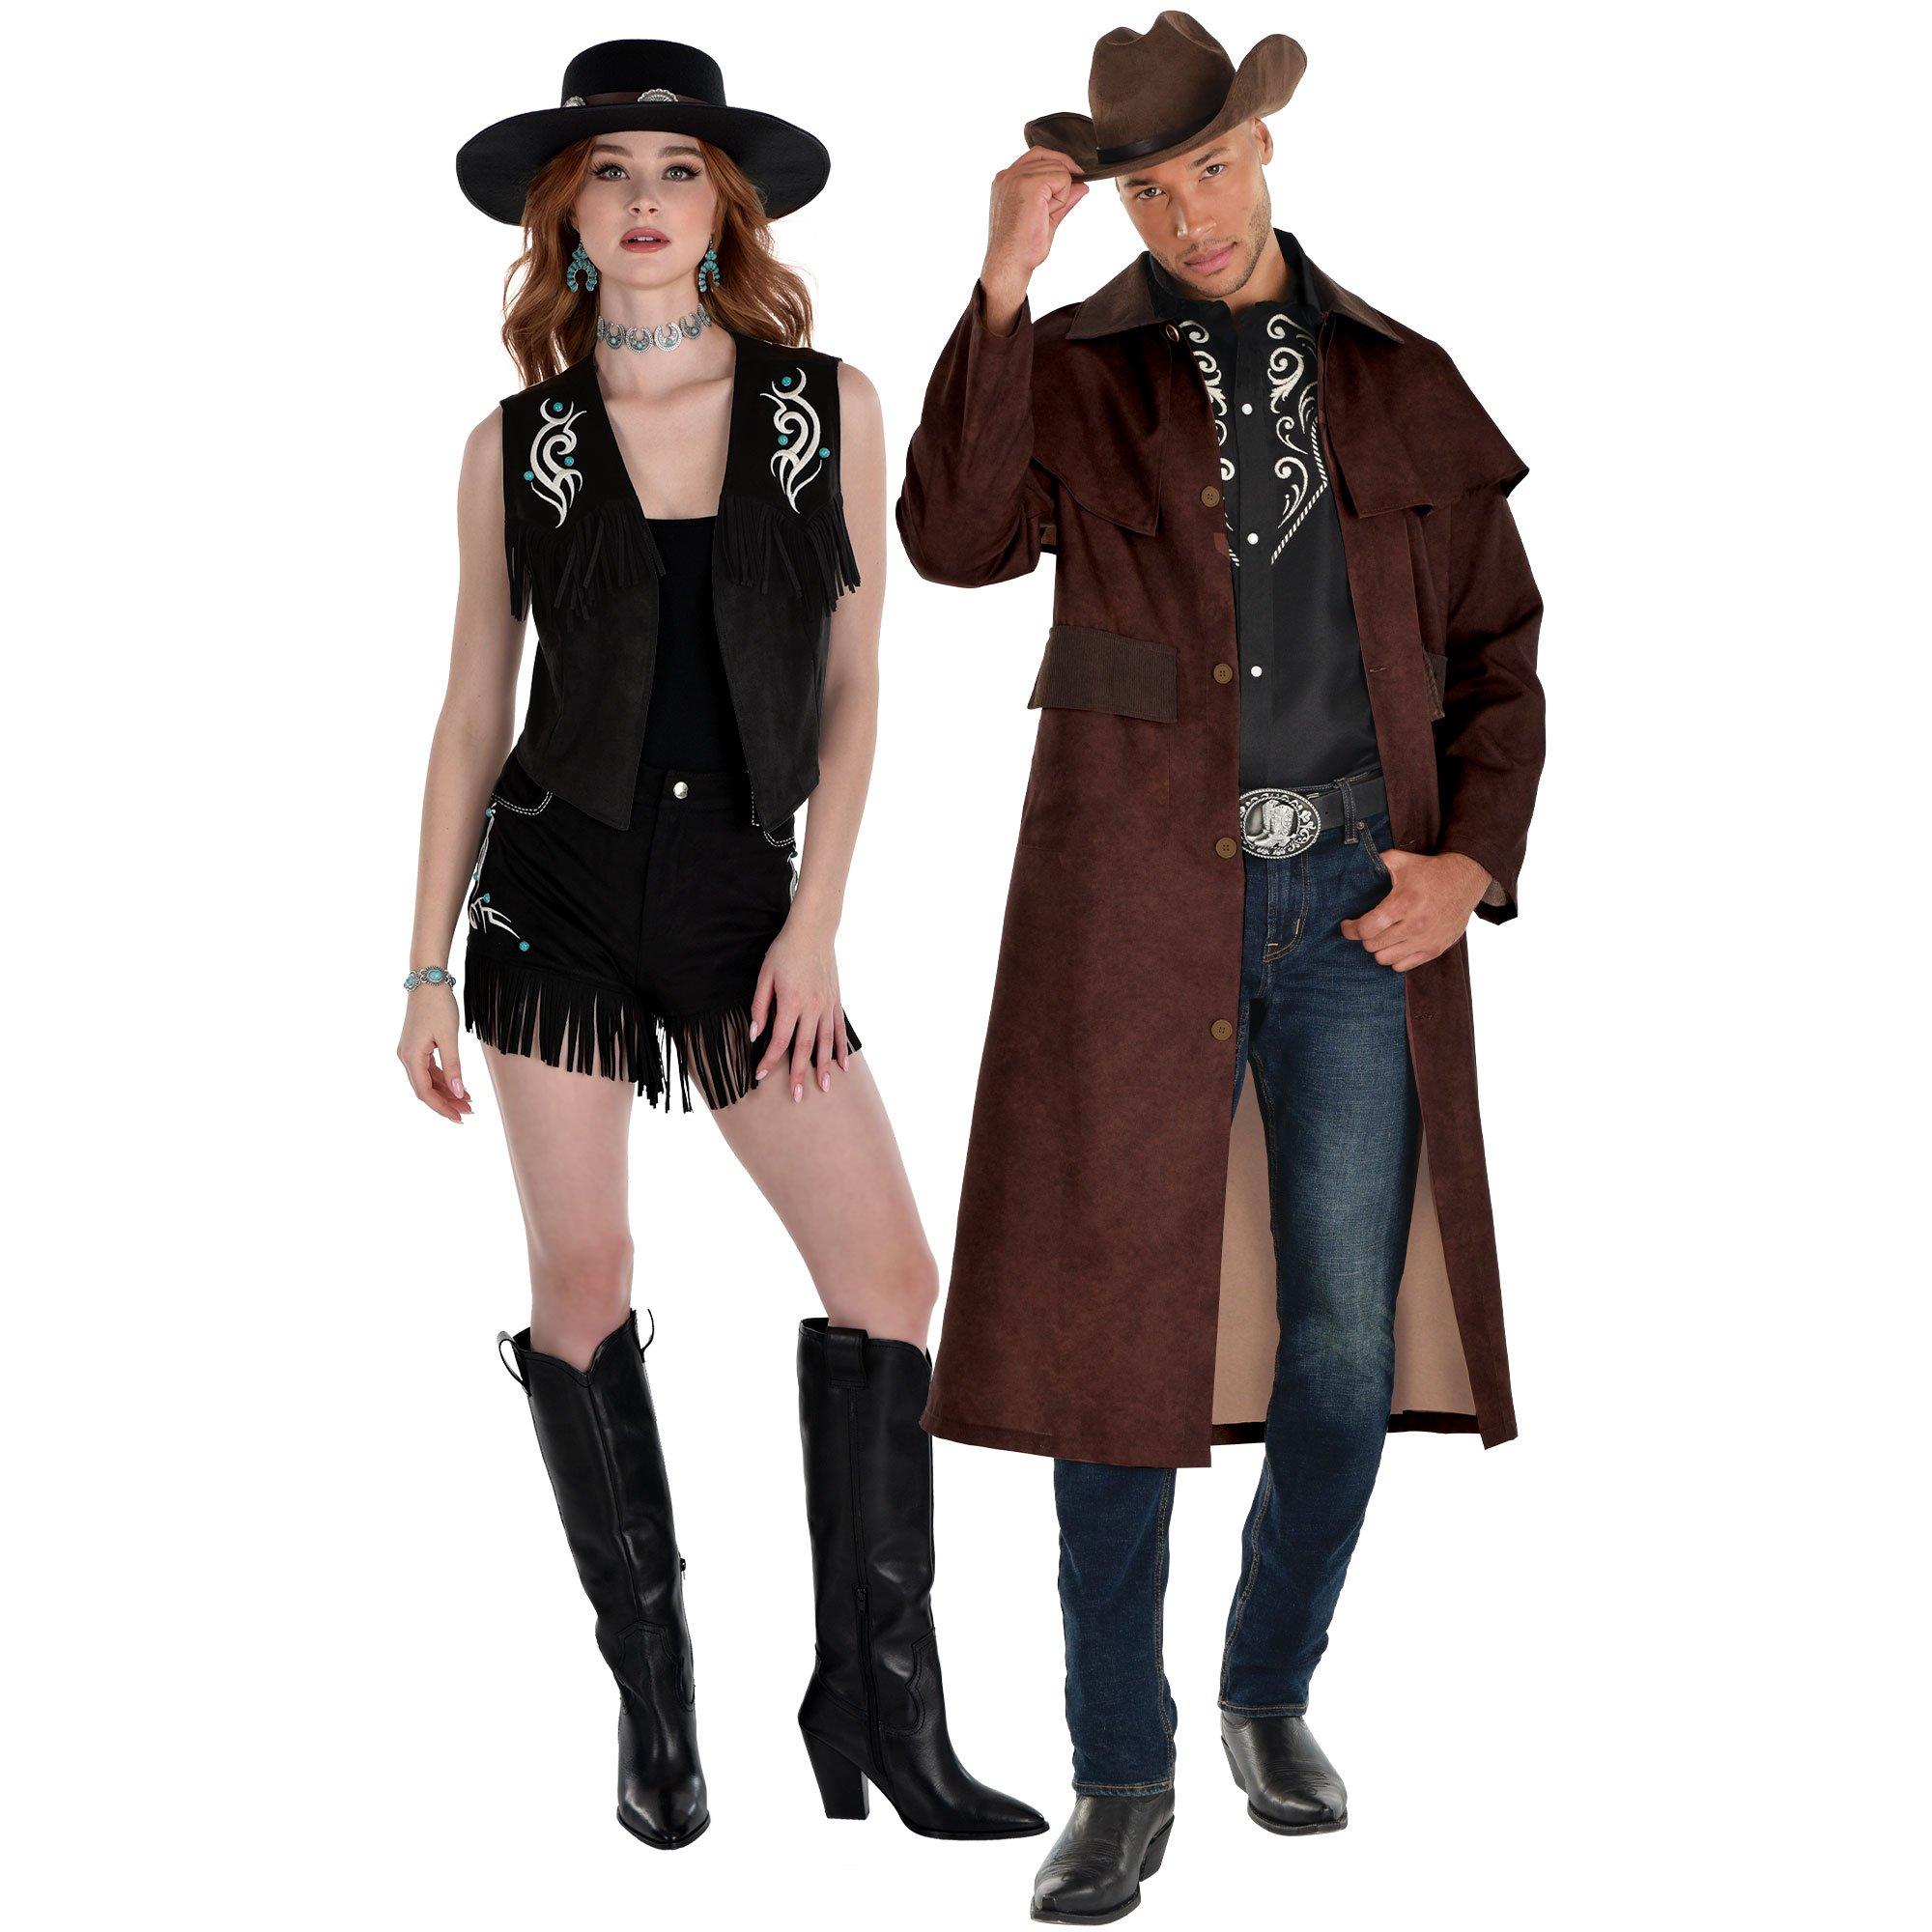 Classic Western Costume Collection